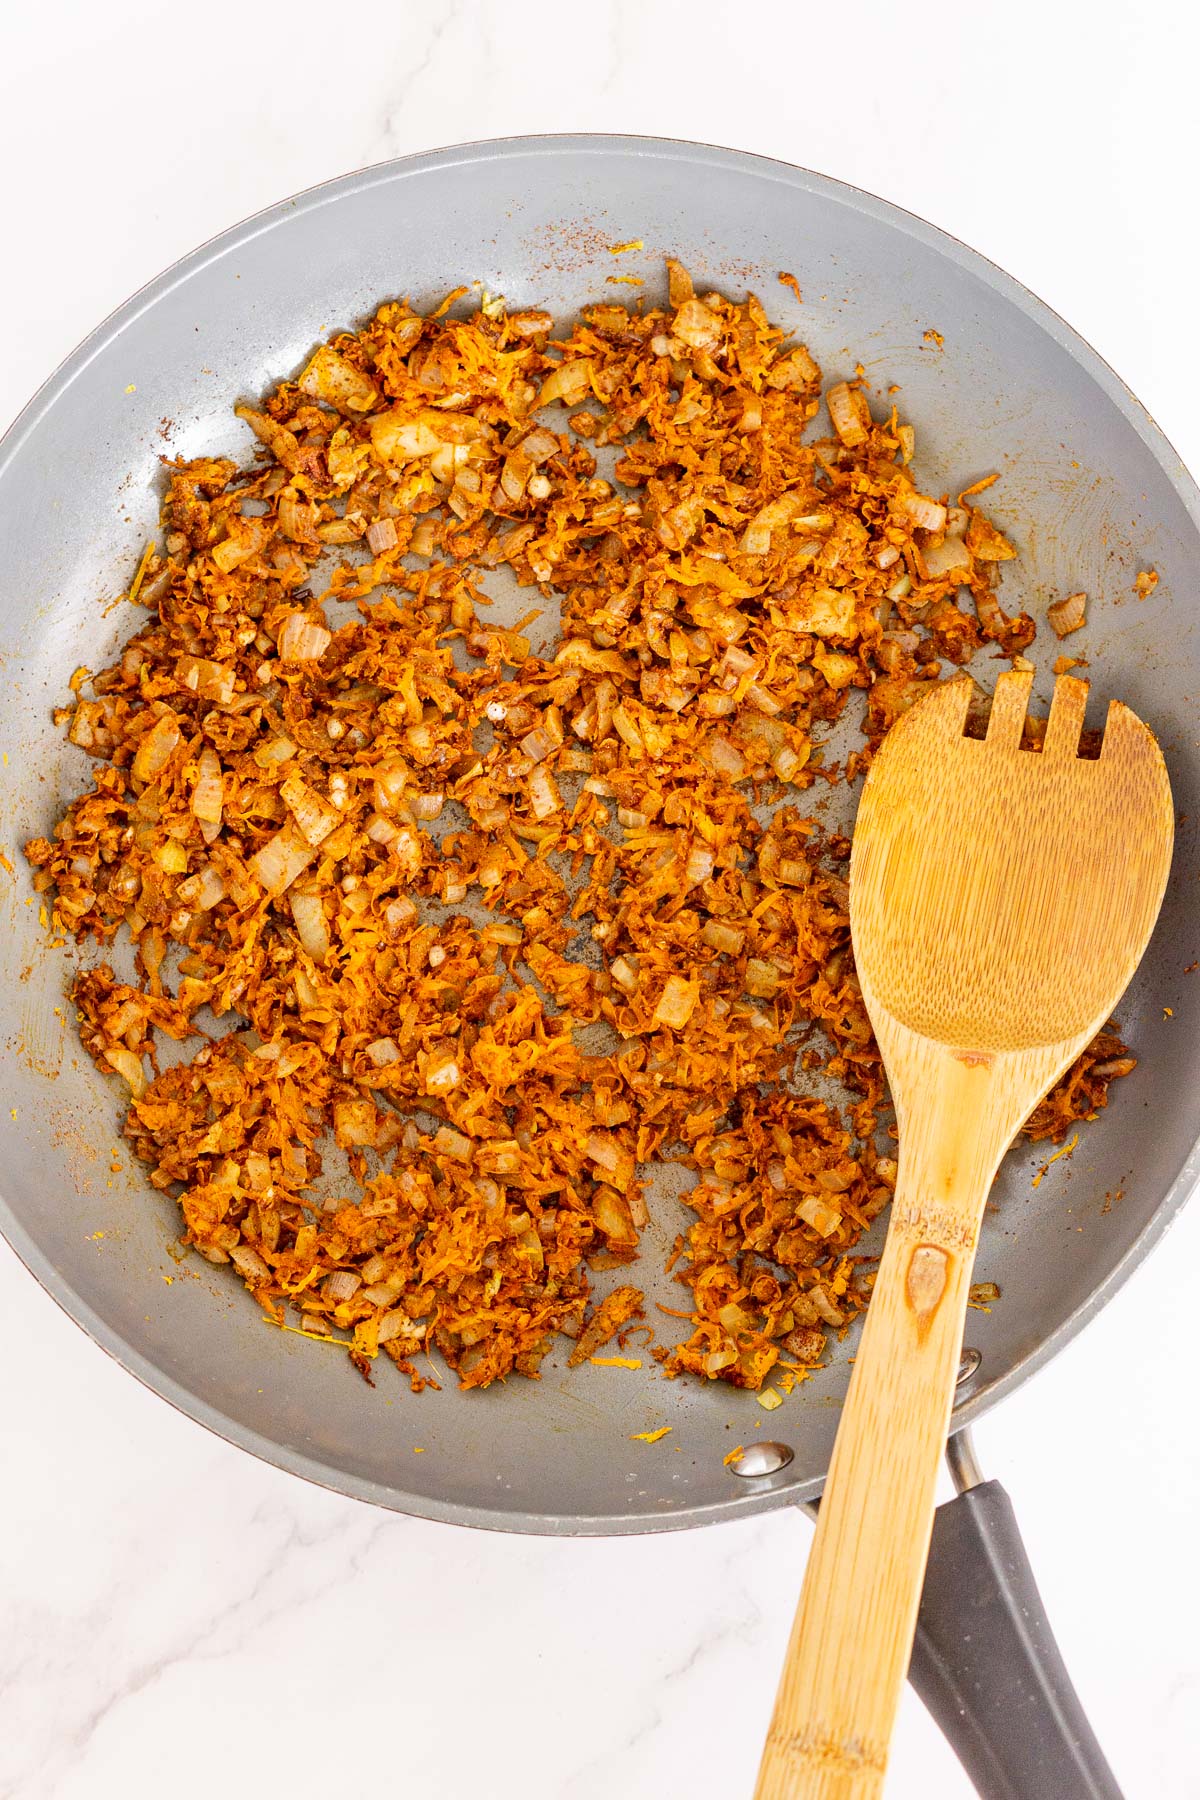 Sauteed carrots, onion, and shakshuka spices in a pan.